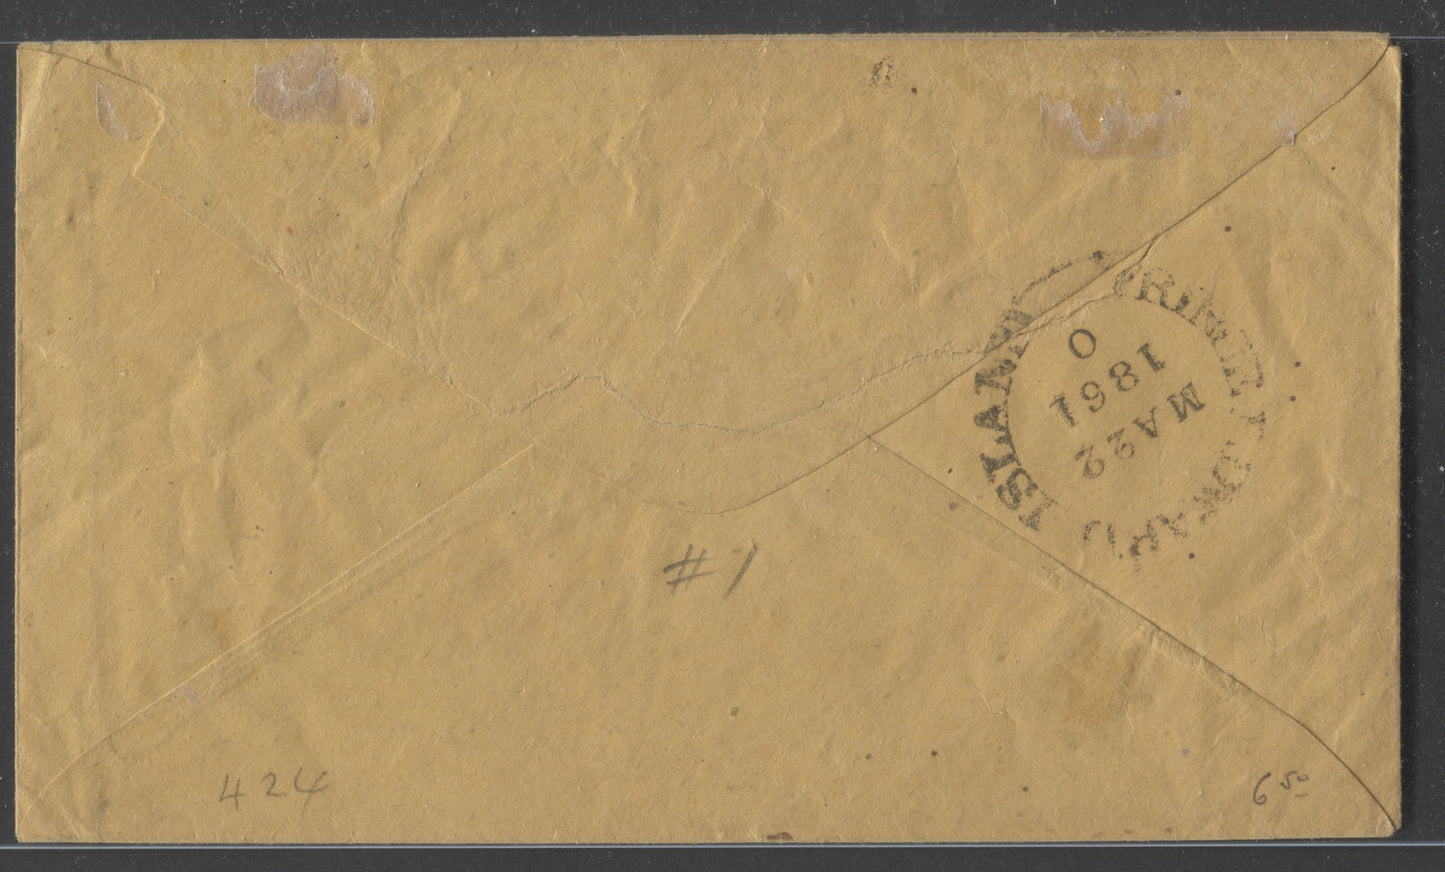 Lot 12 Prince Edward Island #1a 2d Deep Rose on Yellowish Paper, Perf. 9 Die 1 Single Usage on May 22, 1861 Cover to James Bearsto, Malpeque, PEI